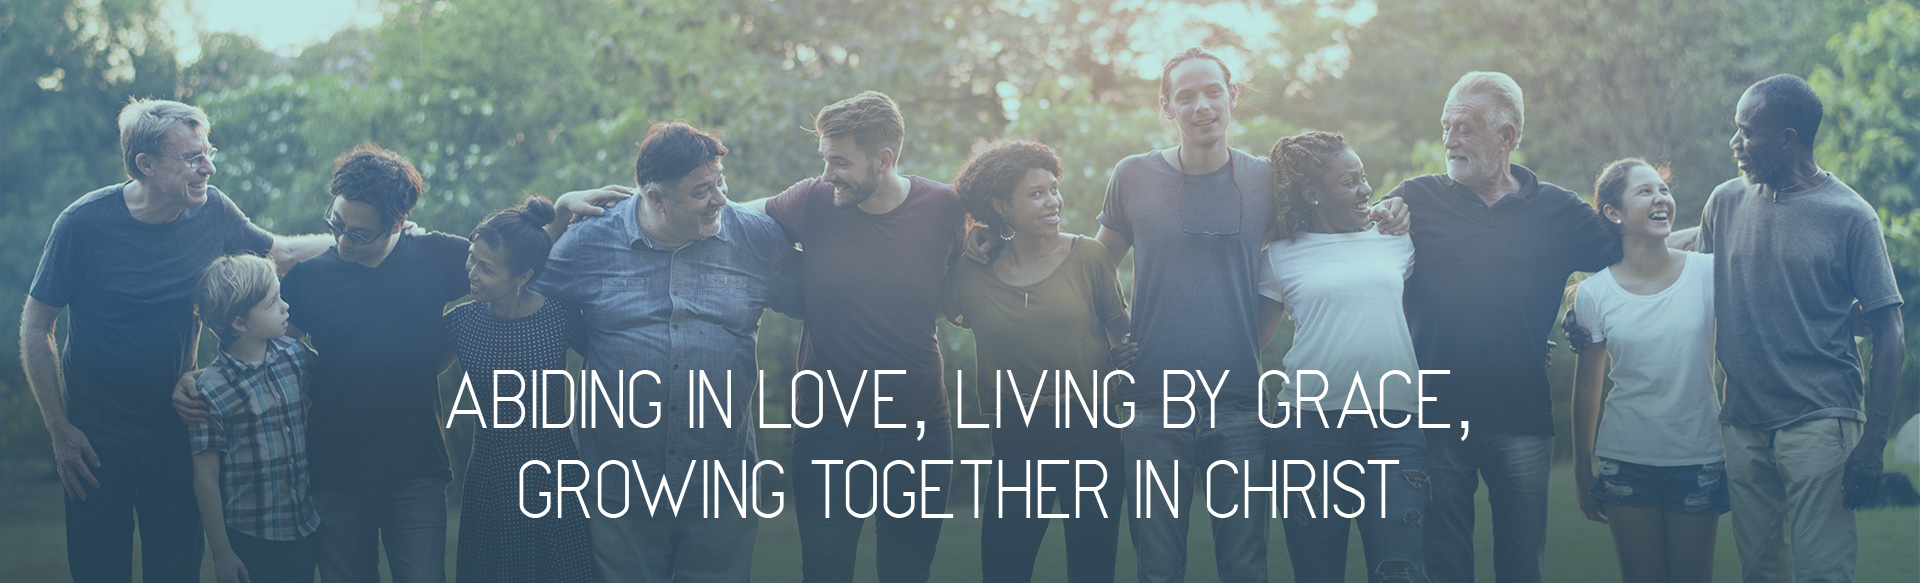 Abiding in love, living by grace, growing together in christ